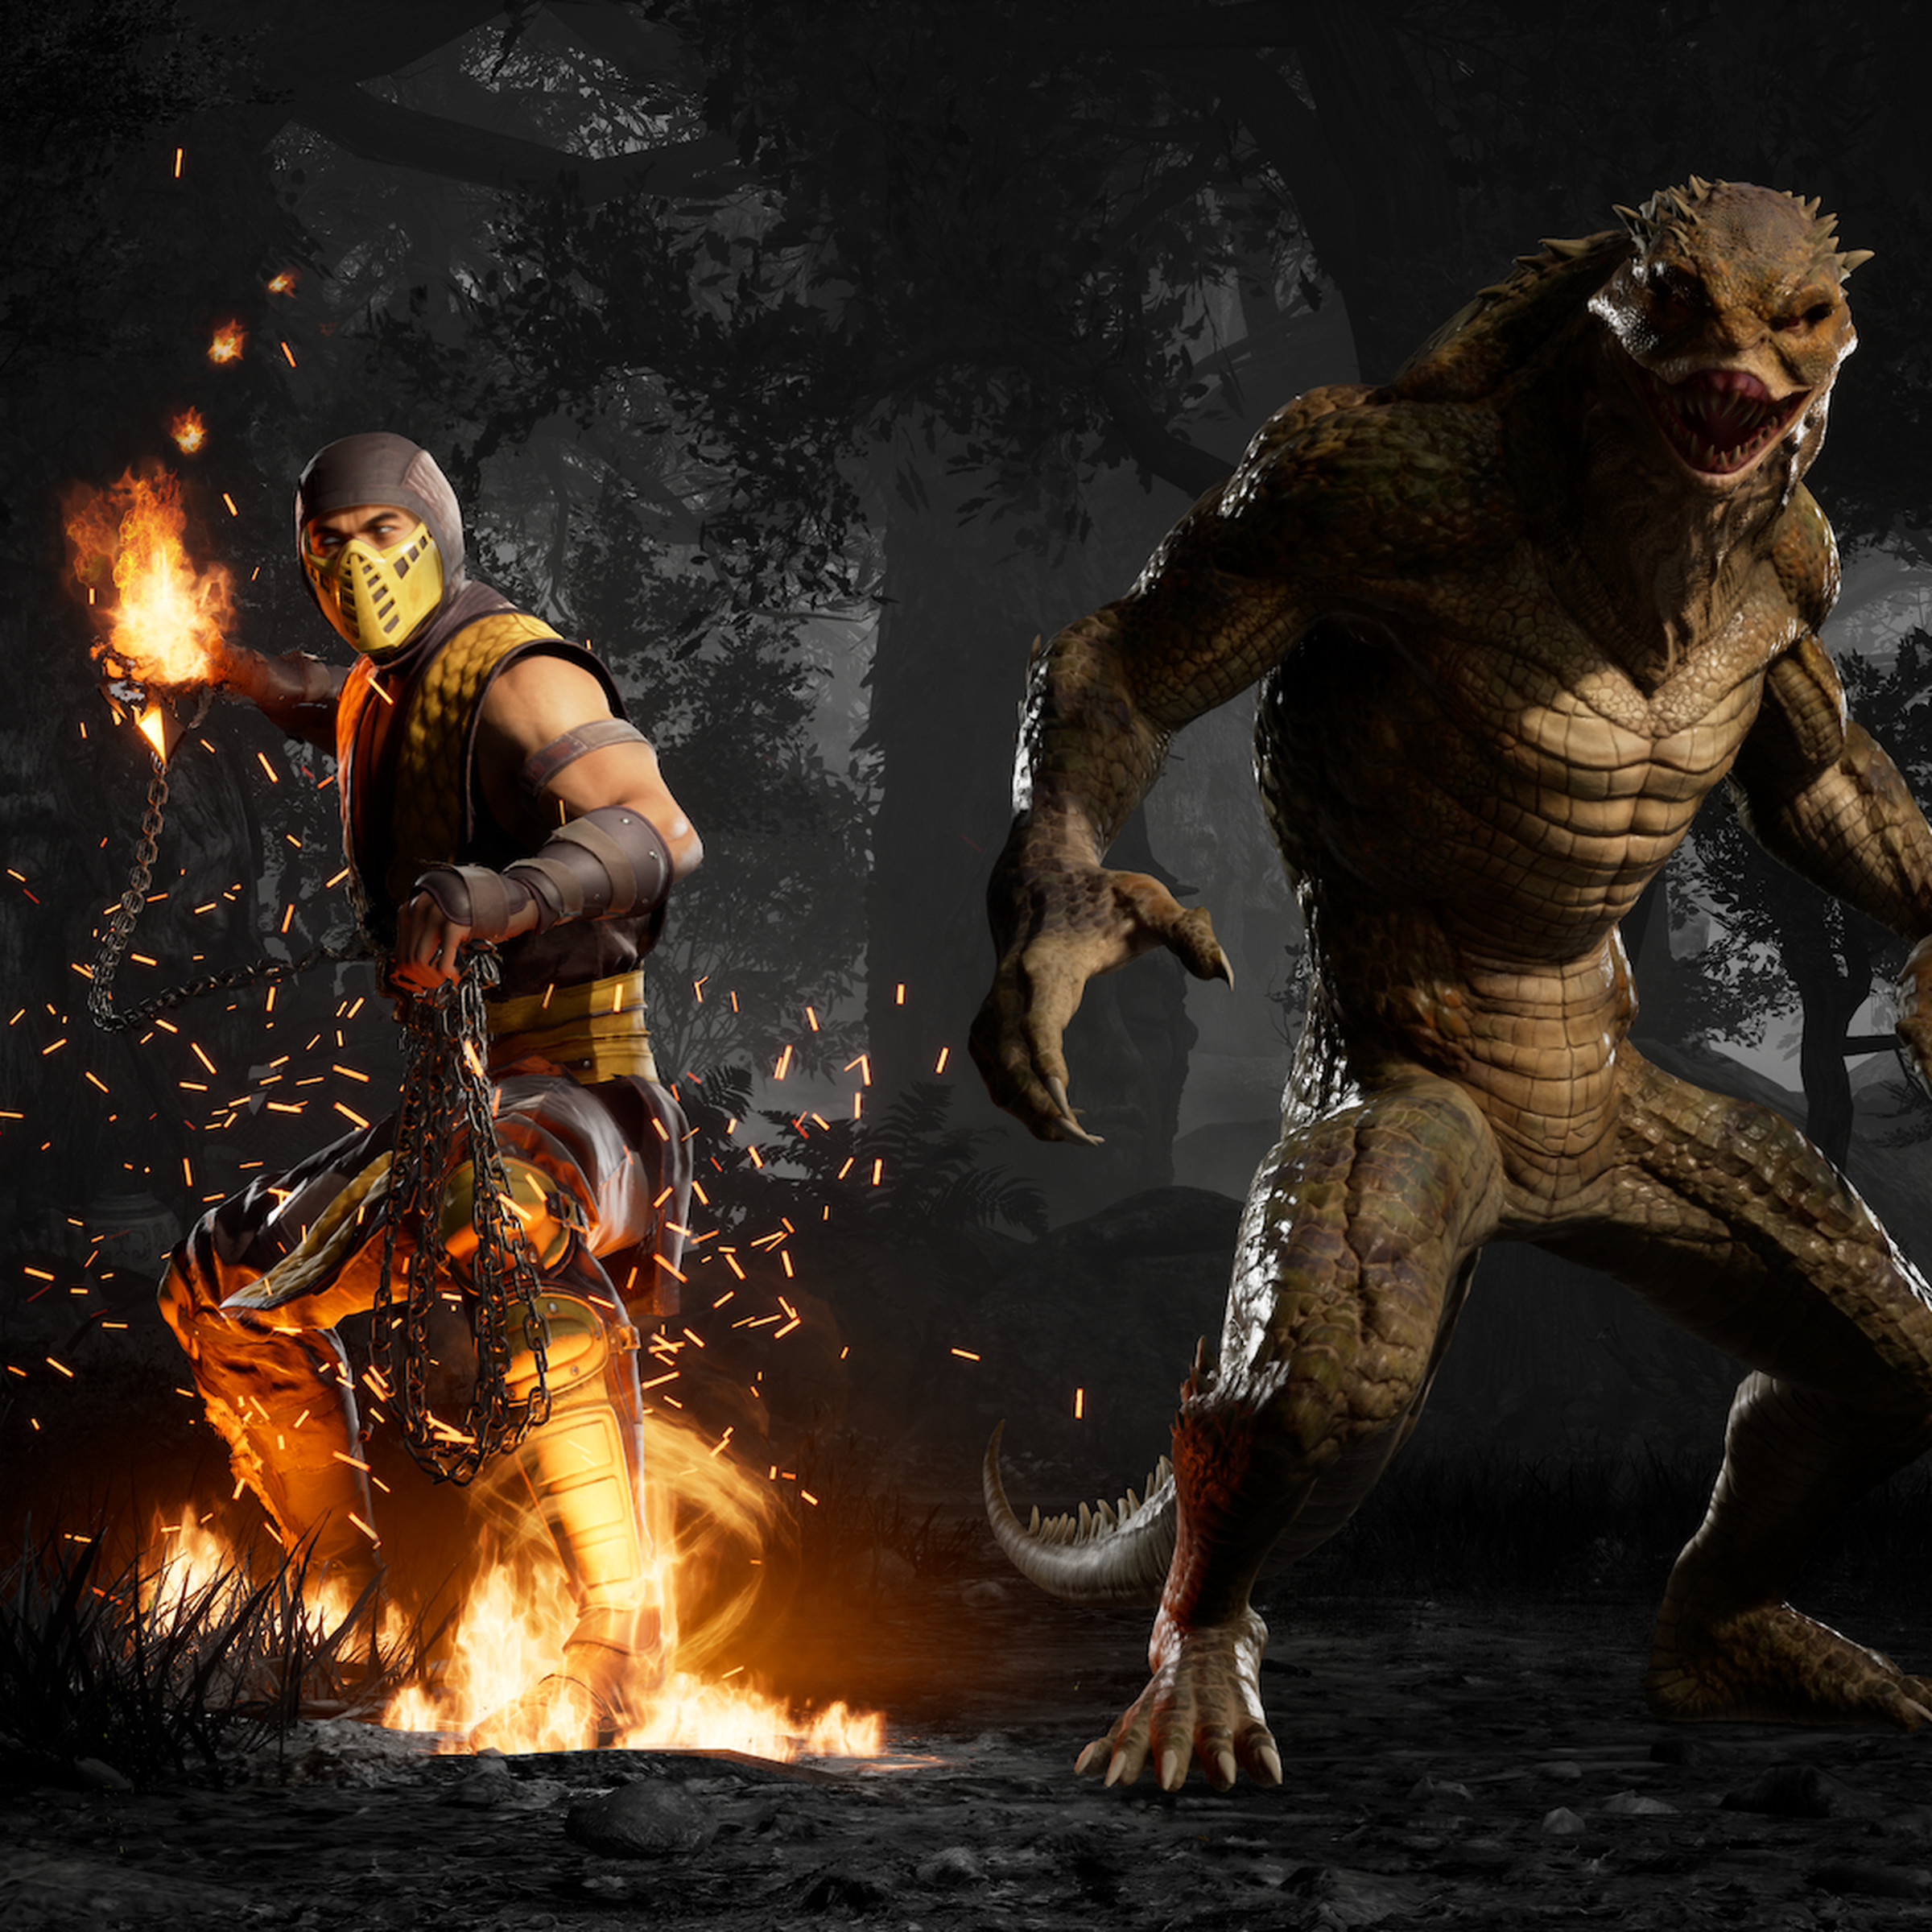 Screenshot from Mortal Kombat 1 featuring the character Scorpion and Reptile facing the camera